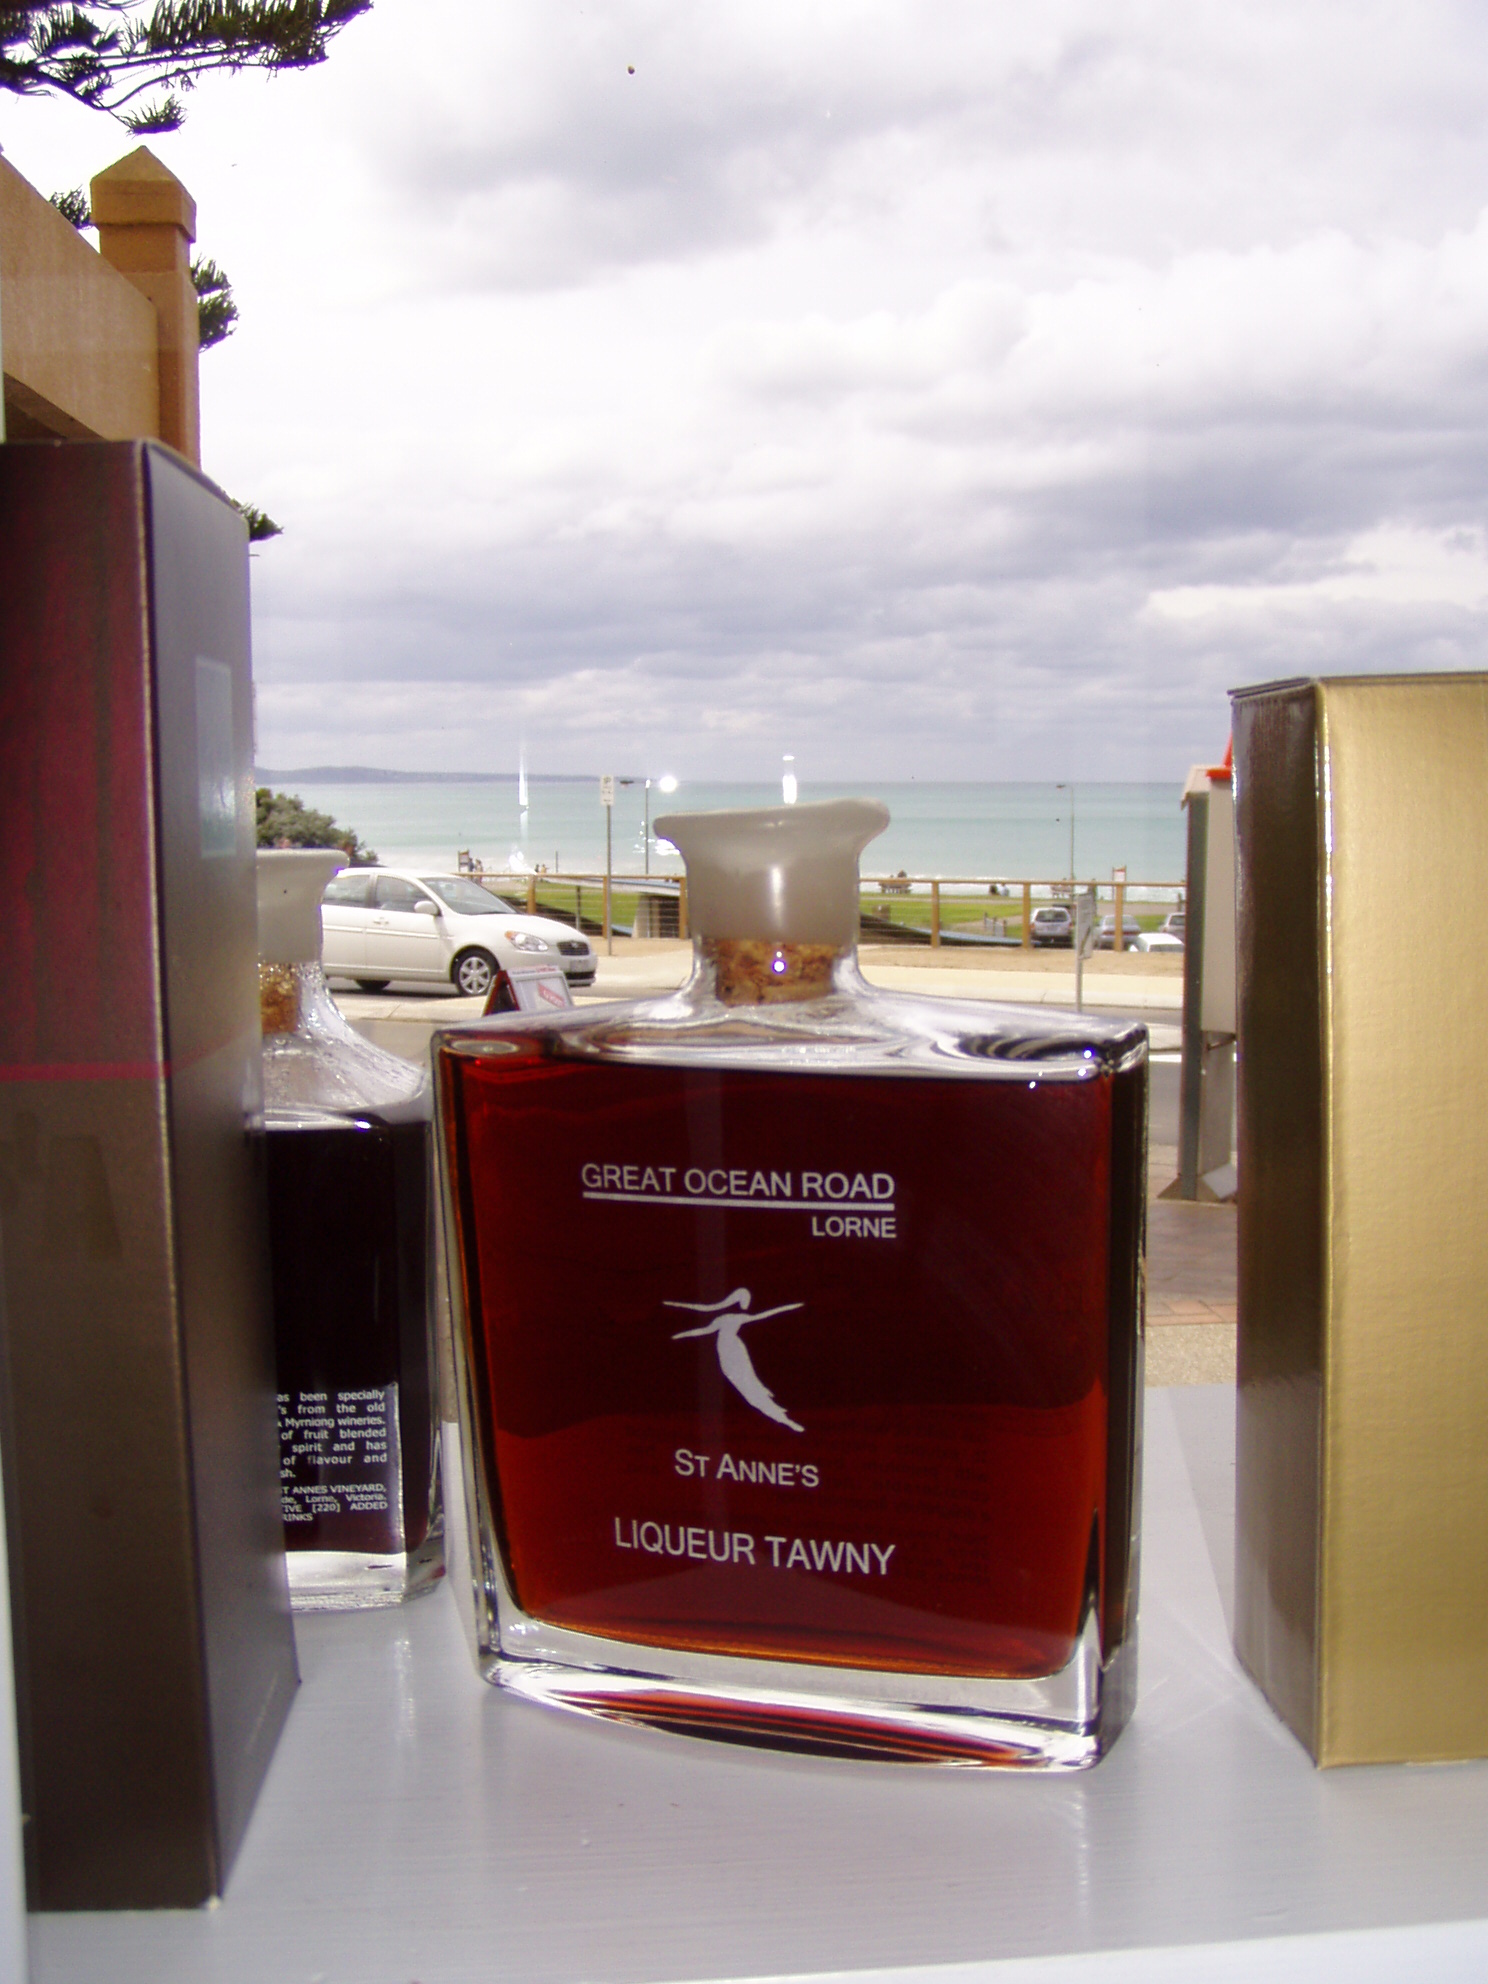 St Anne's Liqueur Tawny on the Great Ocean Road